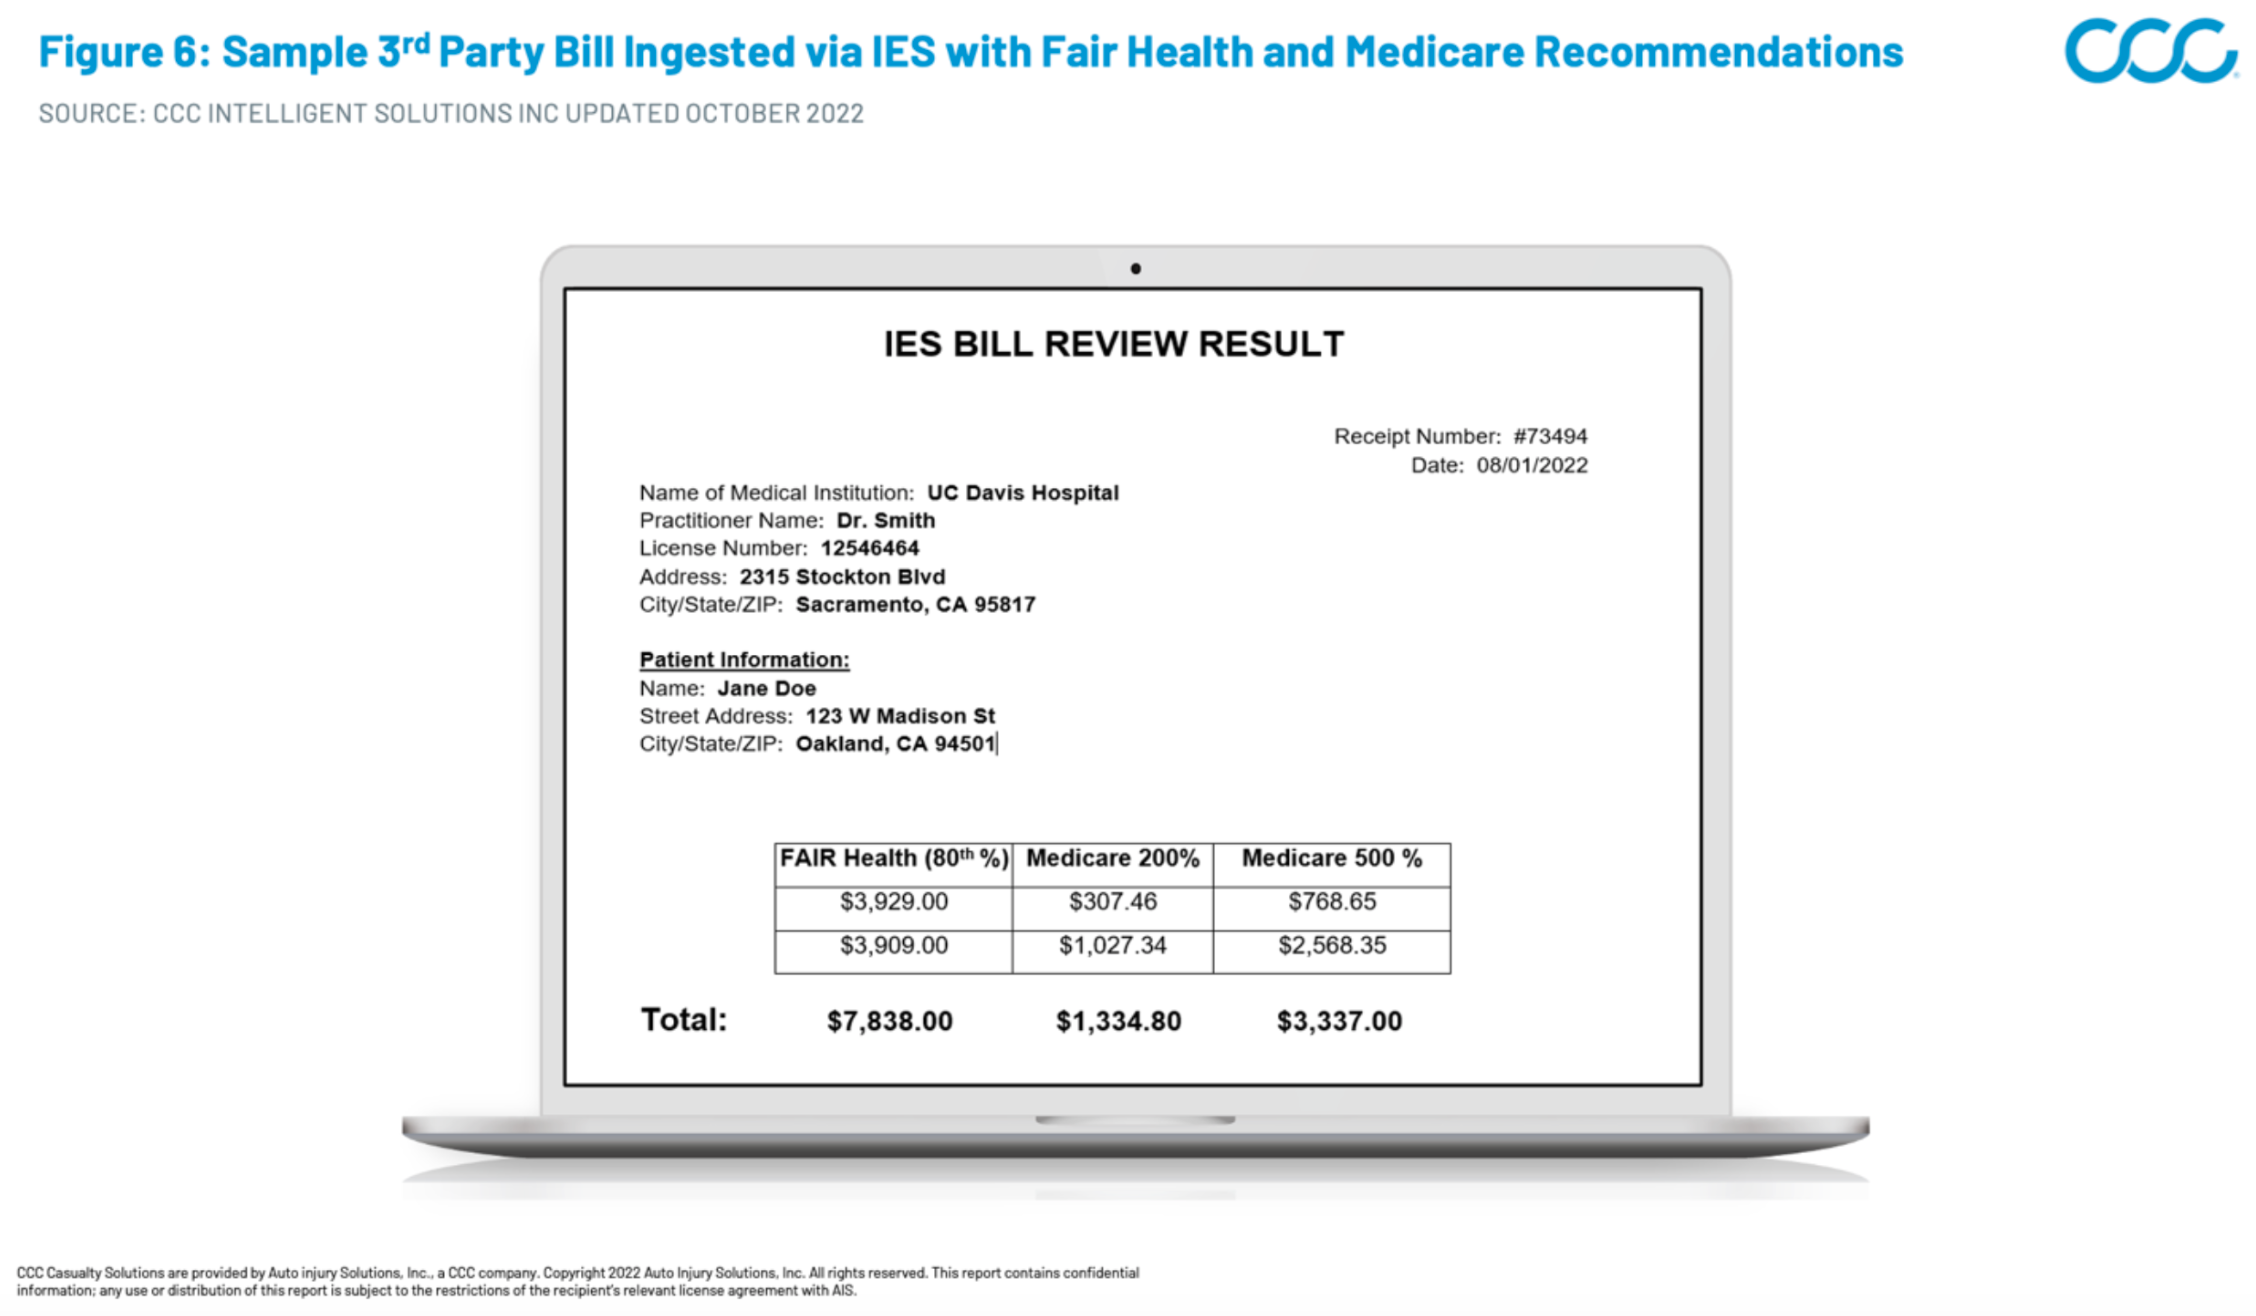 Sample Bill Ingested via IES with Fair Health and Medicare Recommendation Values